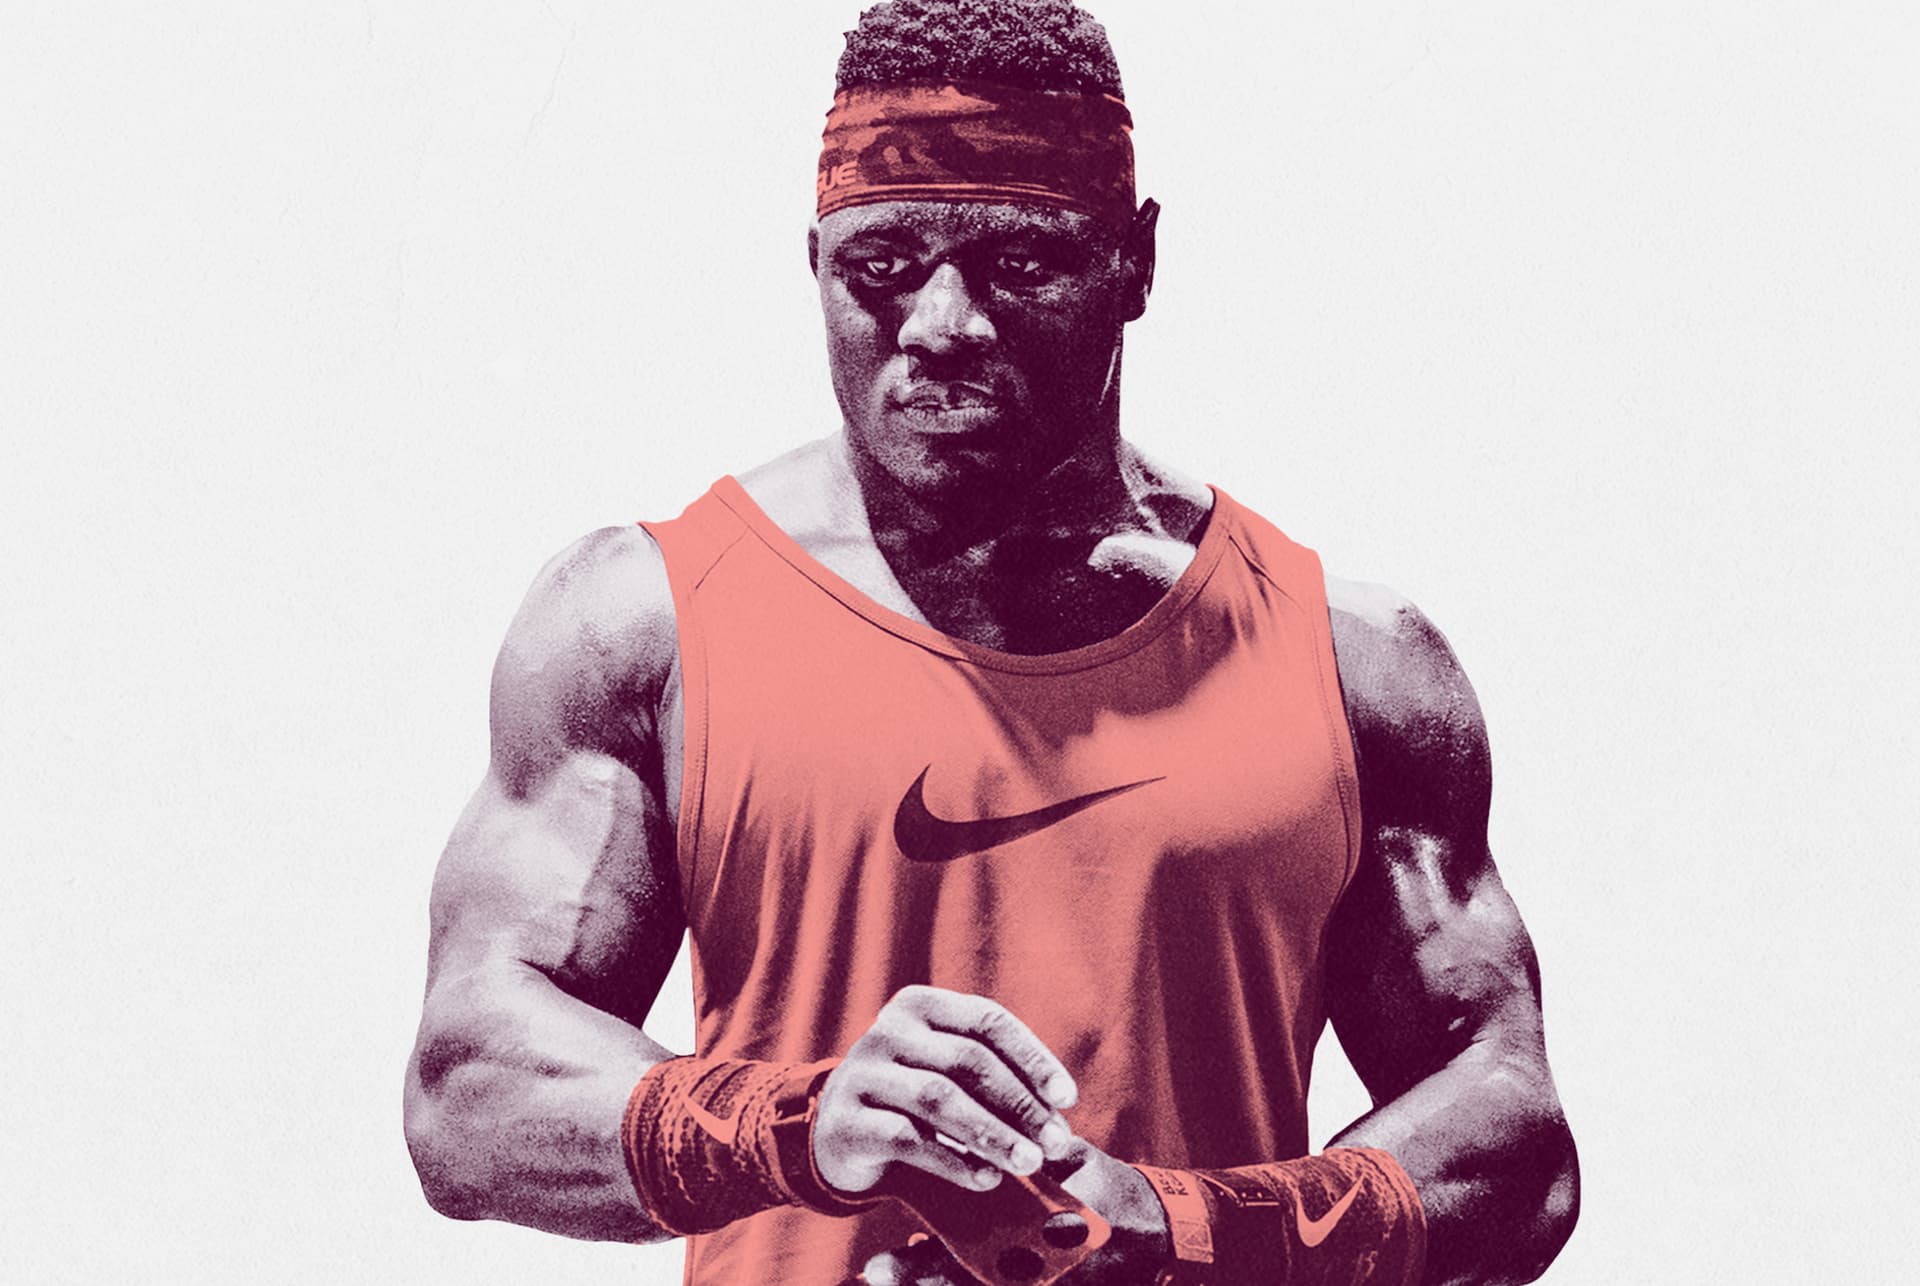 Hit Goals With Mental Training CrossFit Athlete Chandler Smith. Nike.com